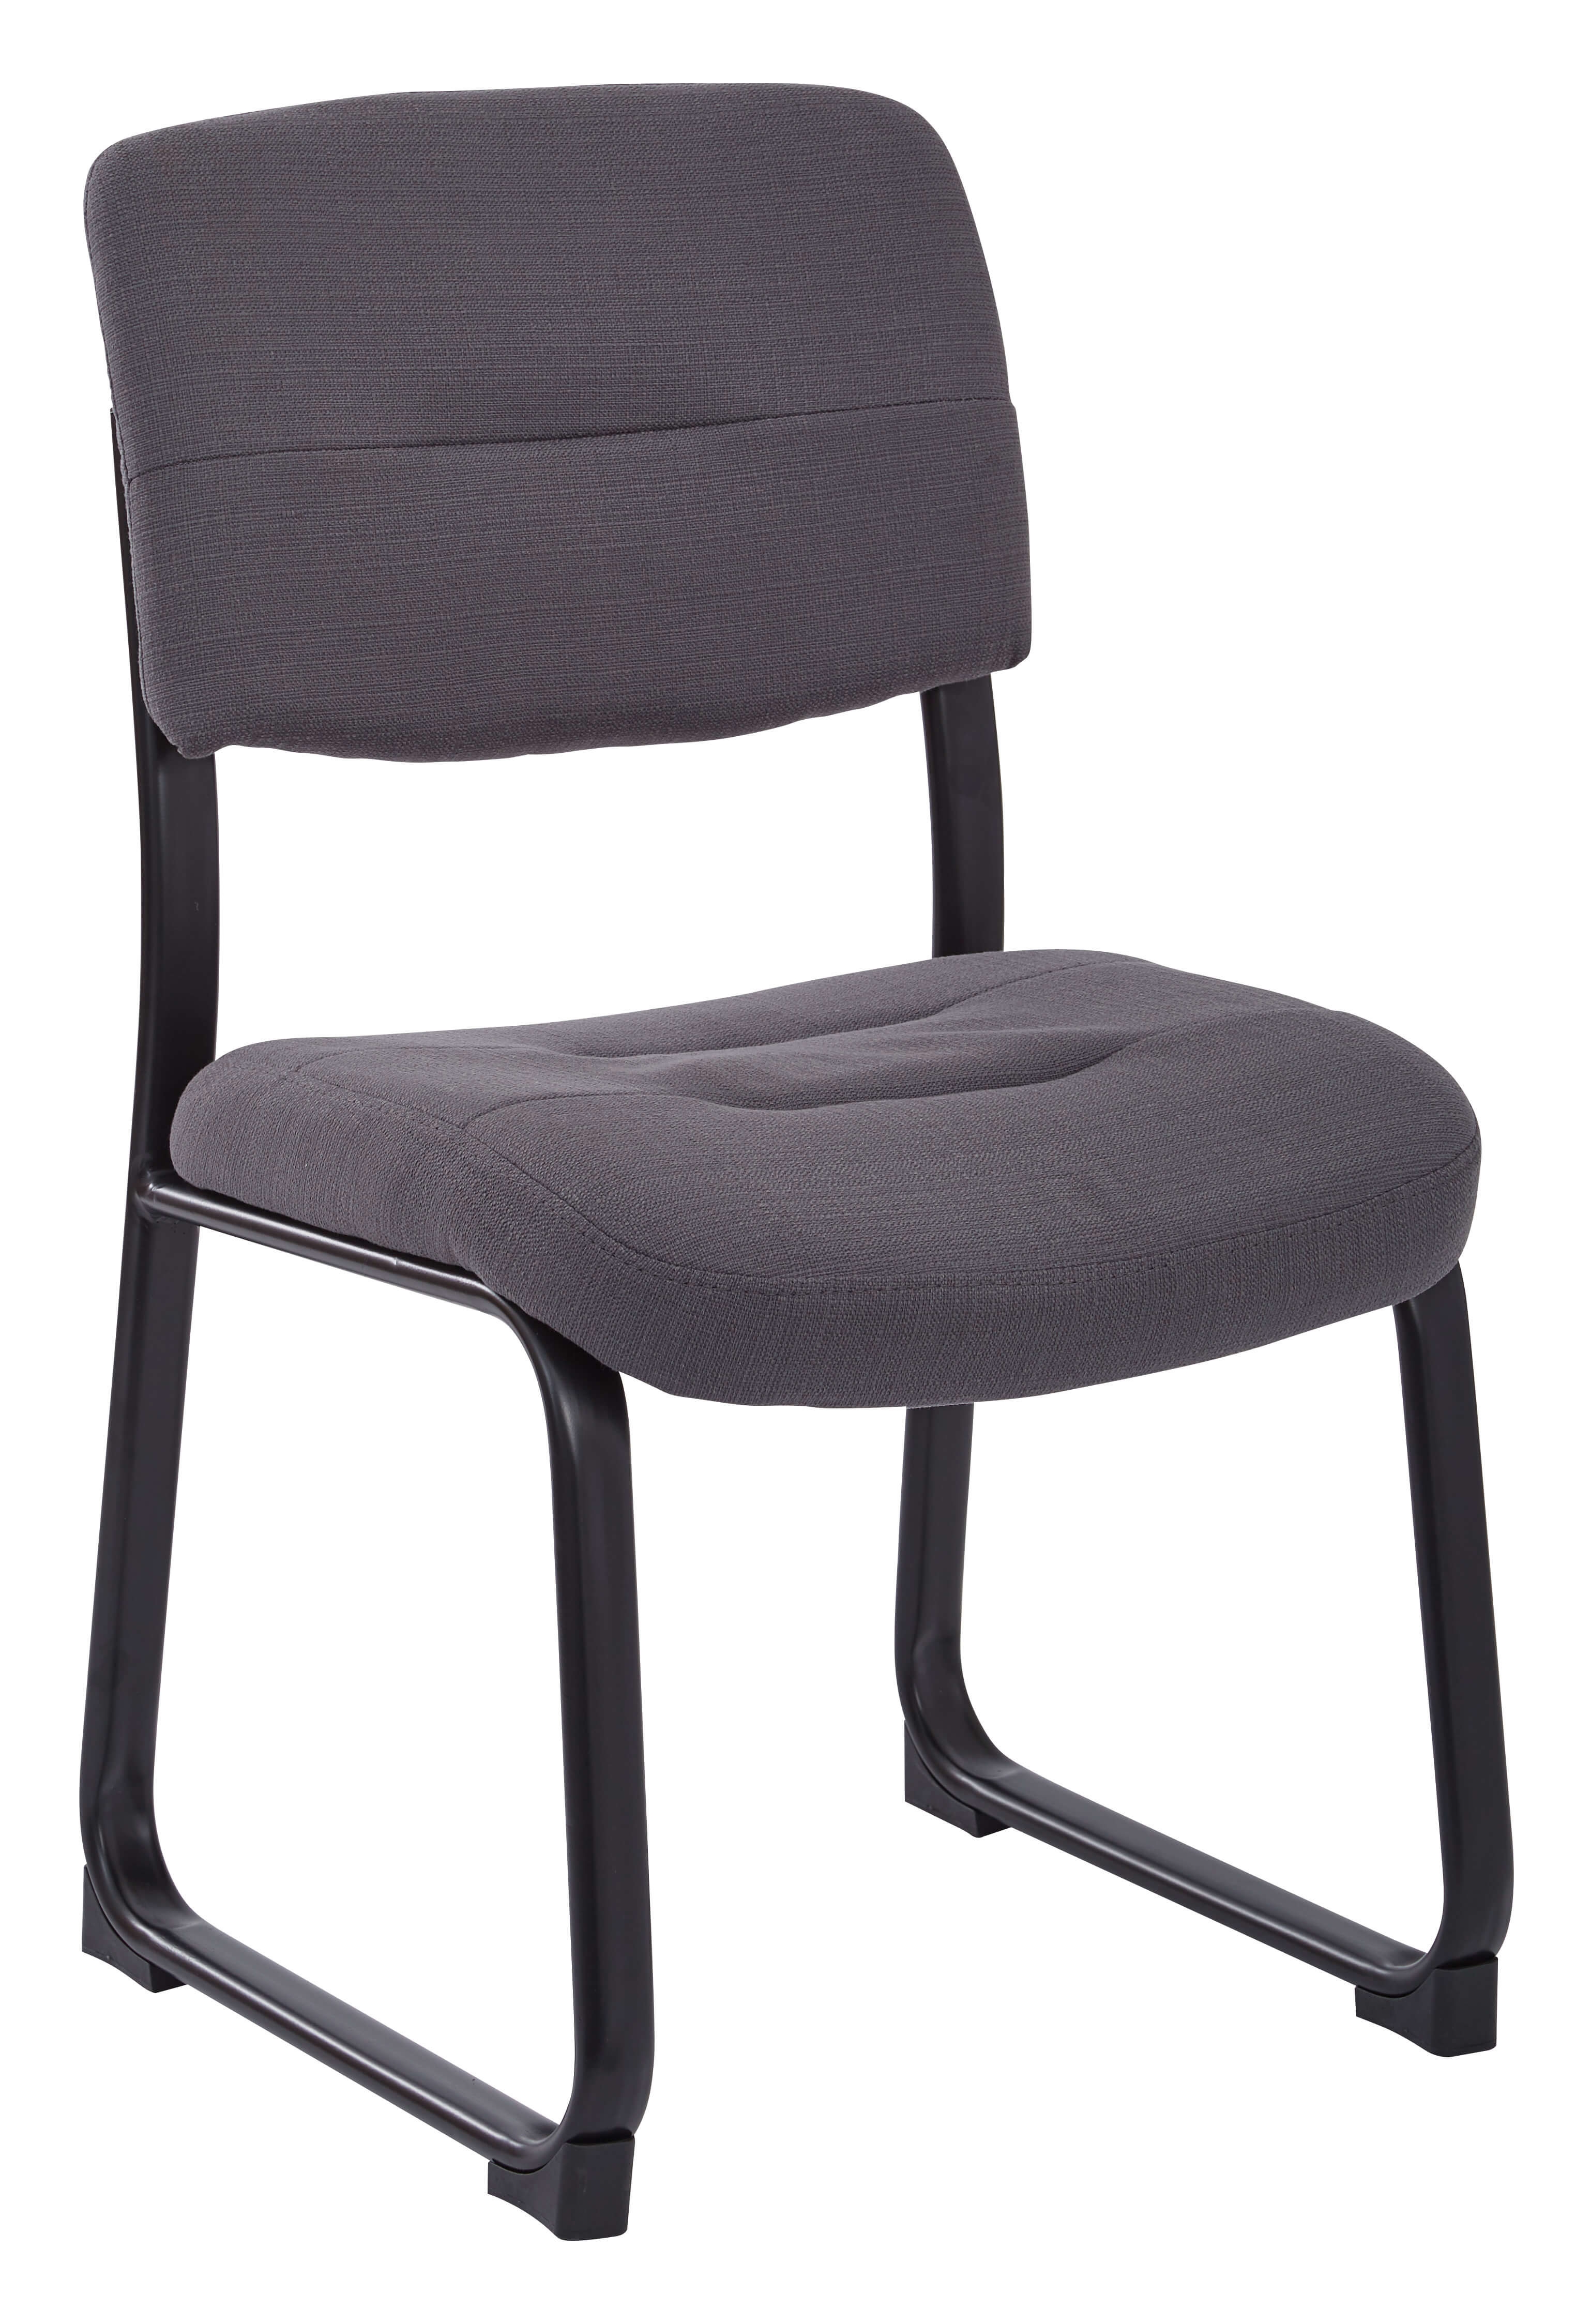 Stackable Chairs - Tenino Modern Office Guest Chairs